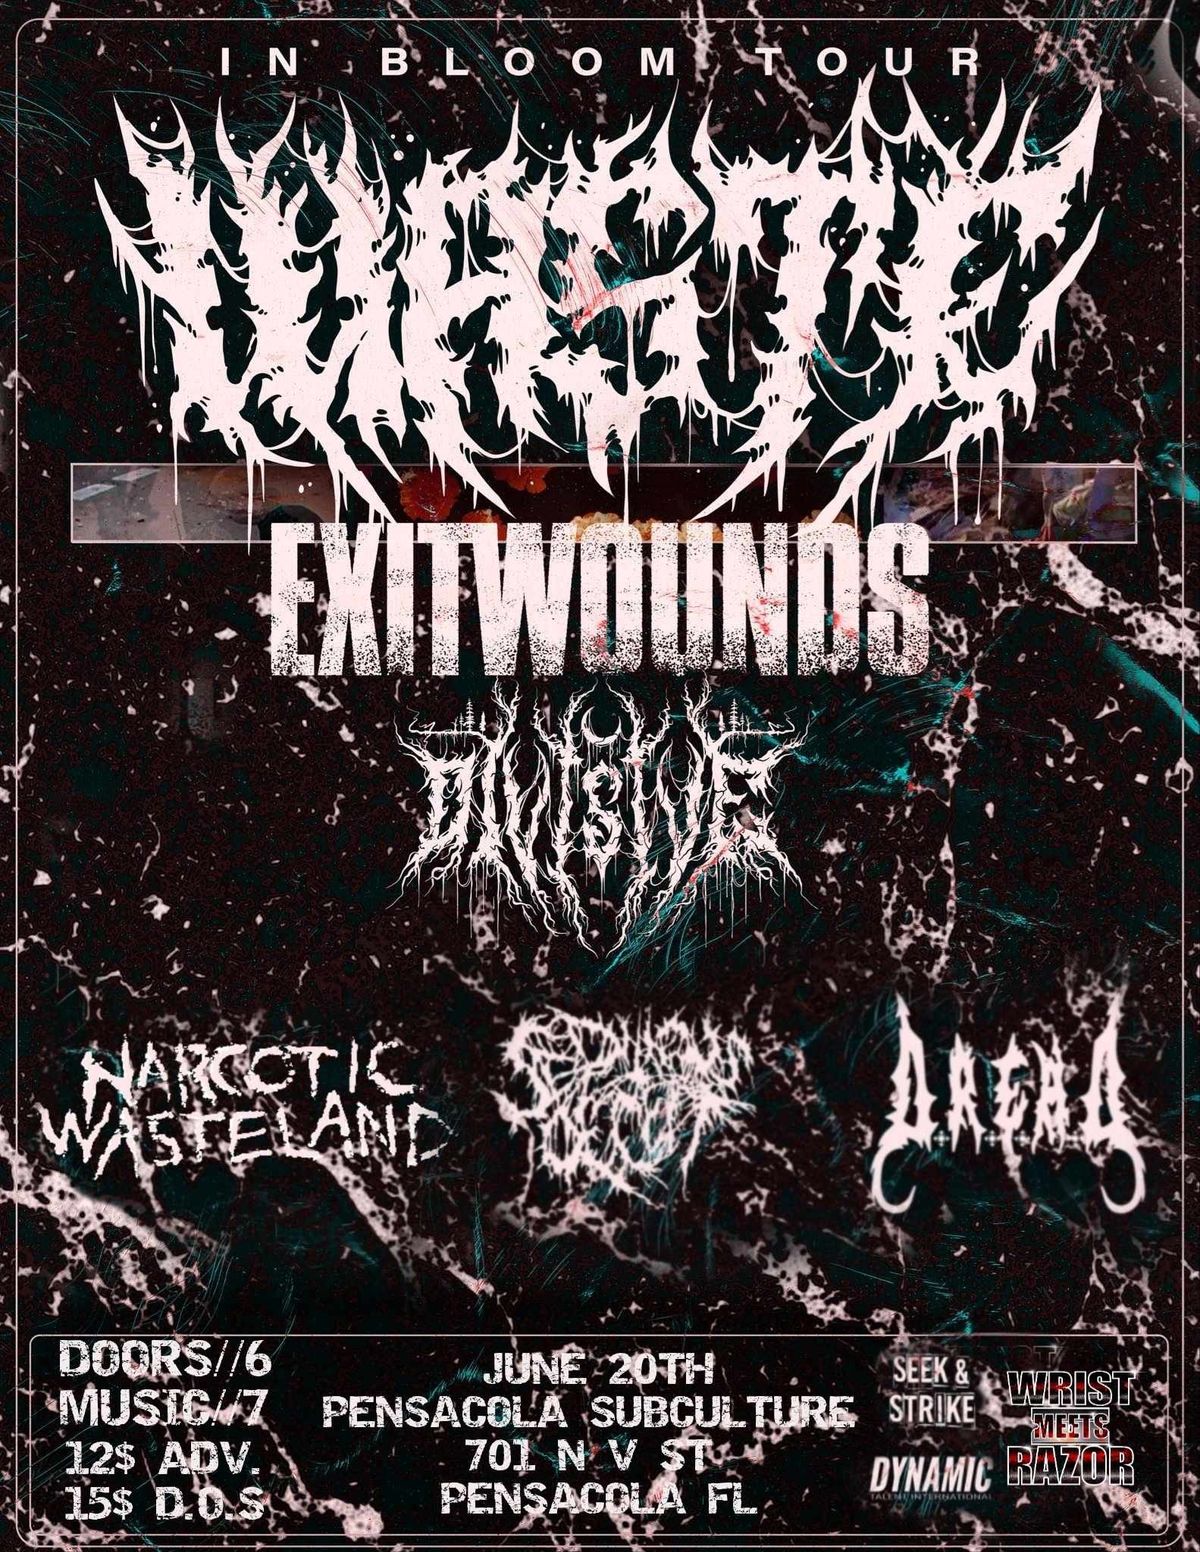 Waste, Exit Wounds, Divisive, Narcotic Wasteland, Seditious Deceit, and D.R.E.A.D at Subculture 